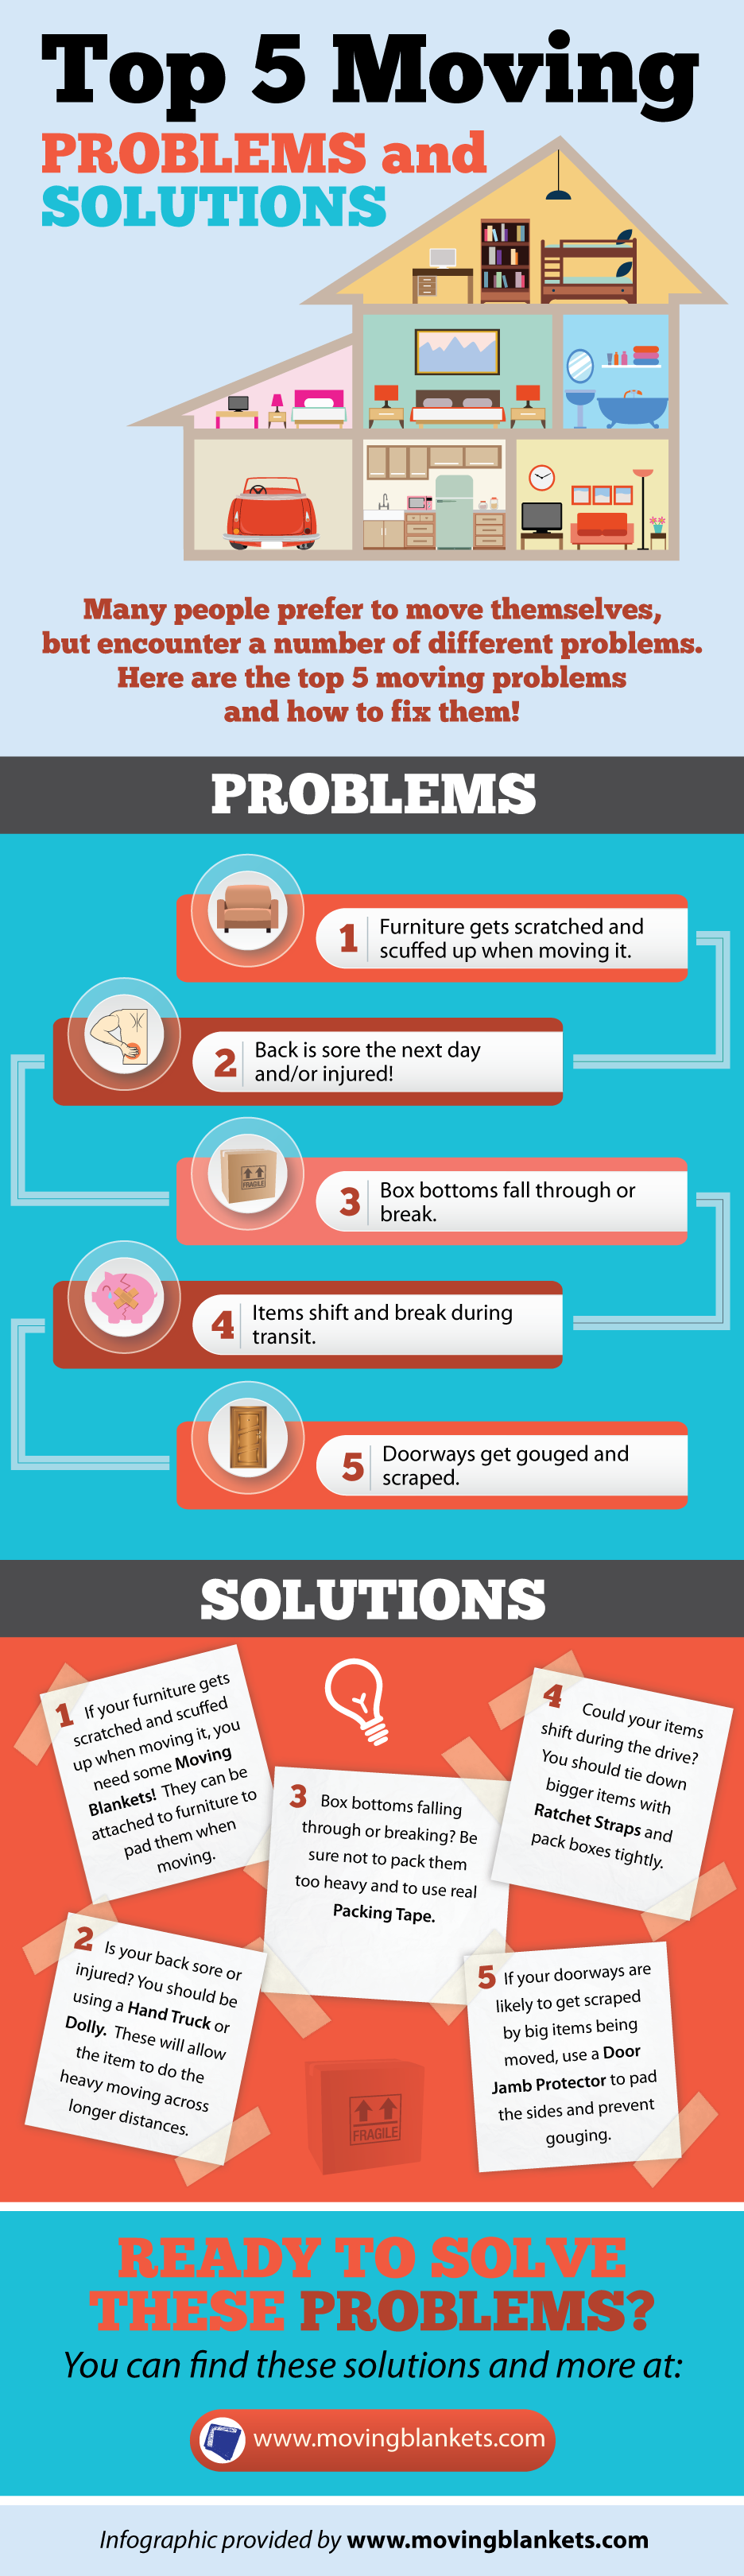 top-5-moving-problems-and-solutions-infographic-plaza